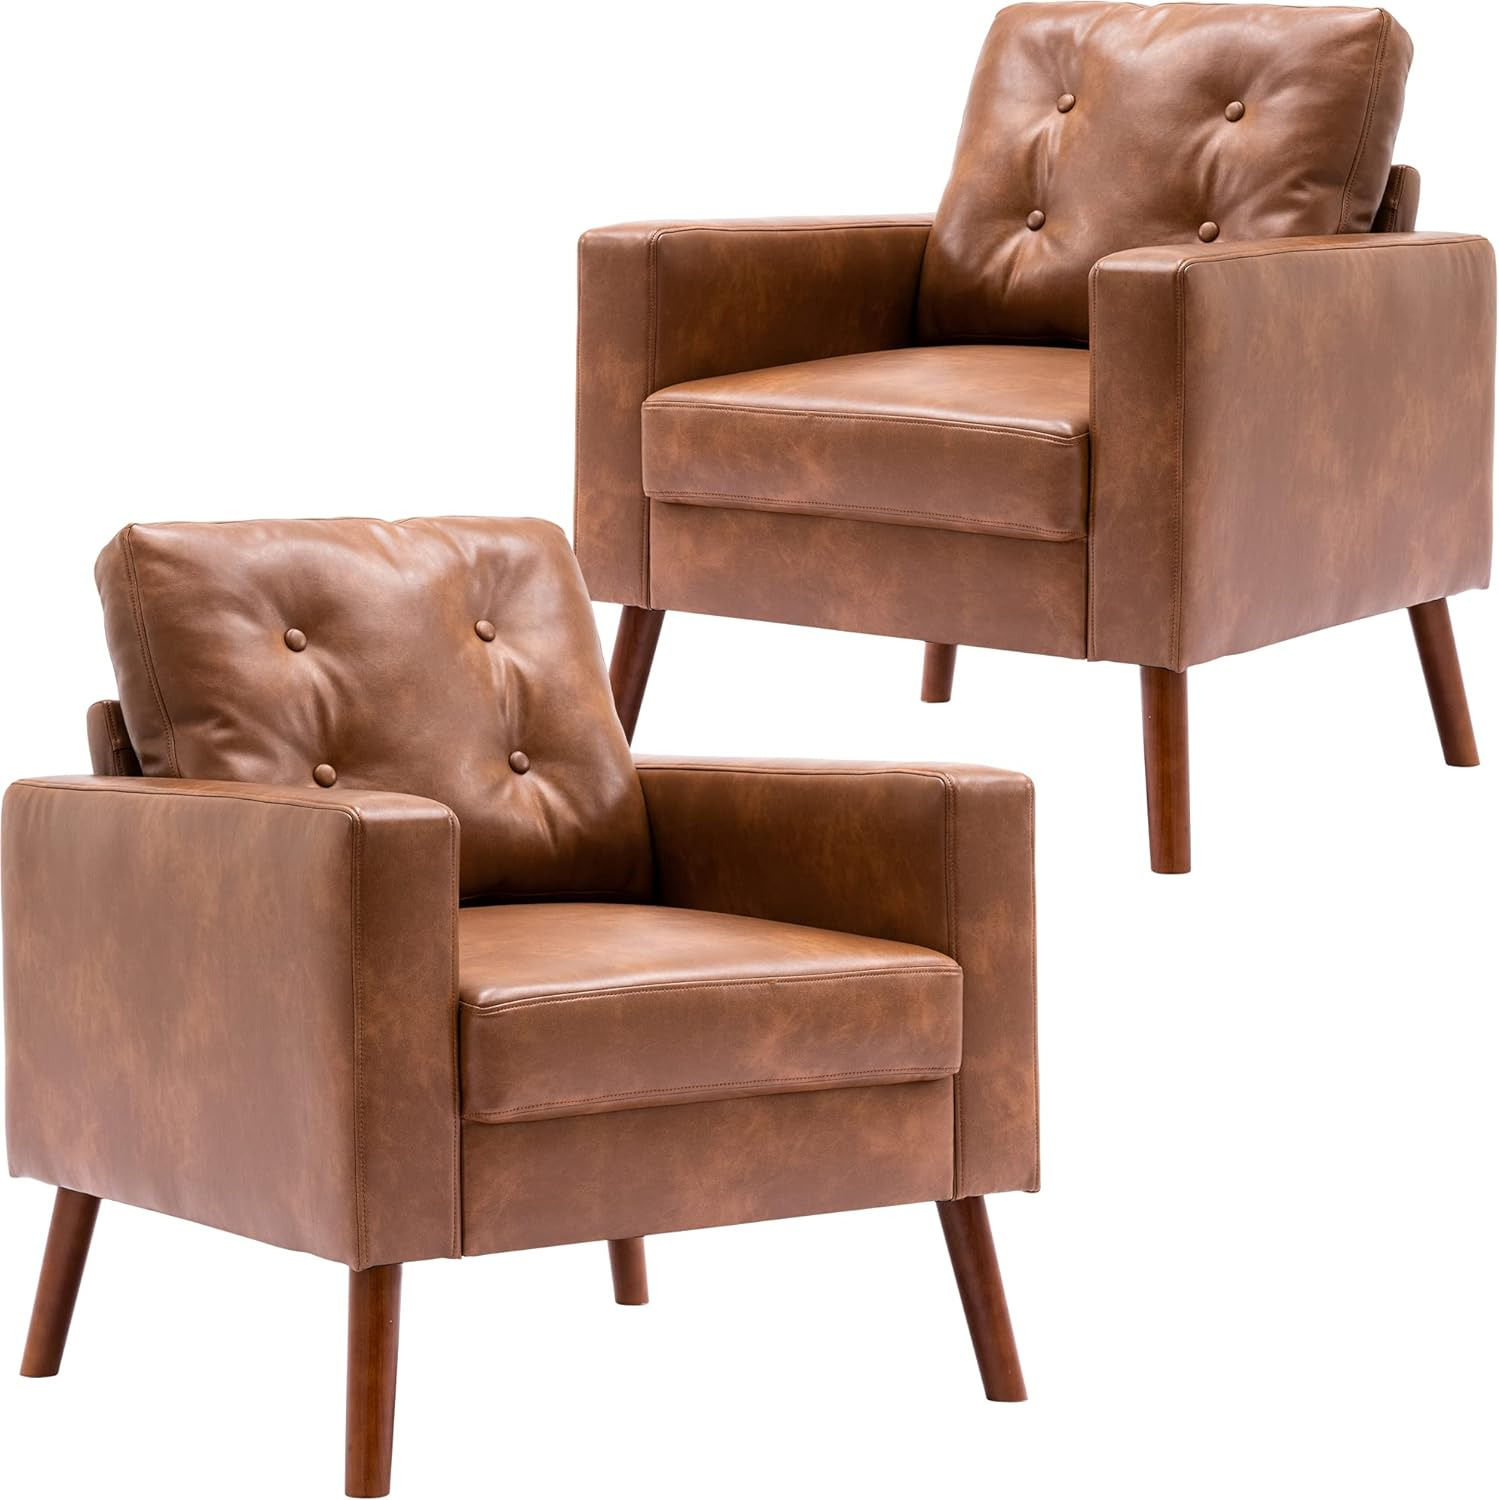 Set of 2 Mid Century Modern Armchair, Caramel Faux Leather Accent Chair Upholste